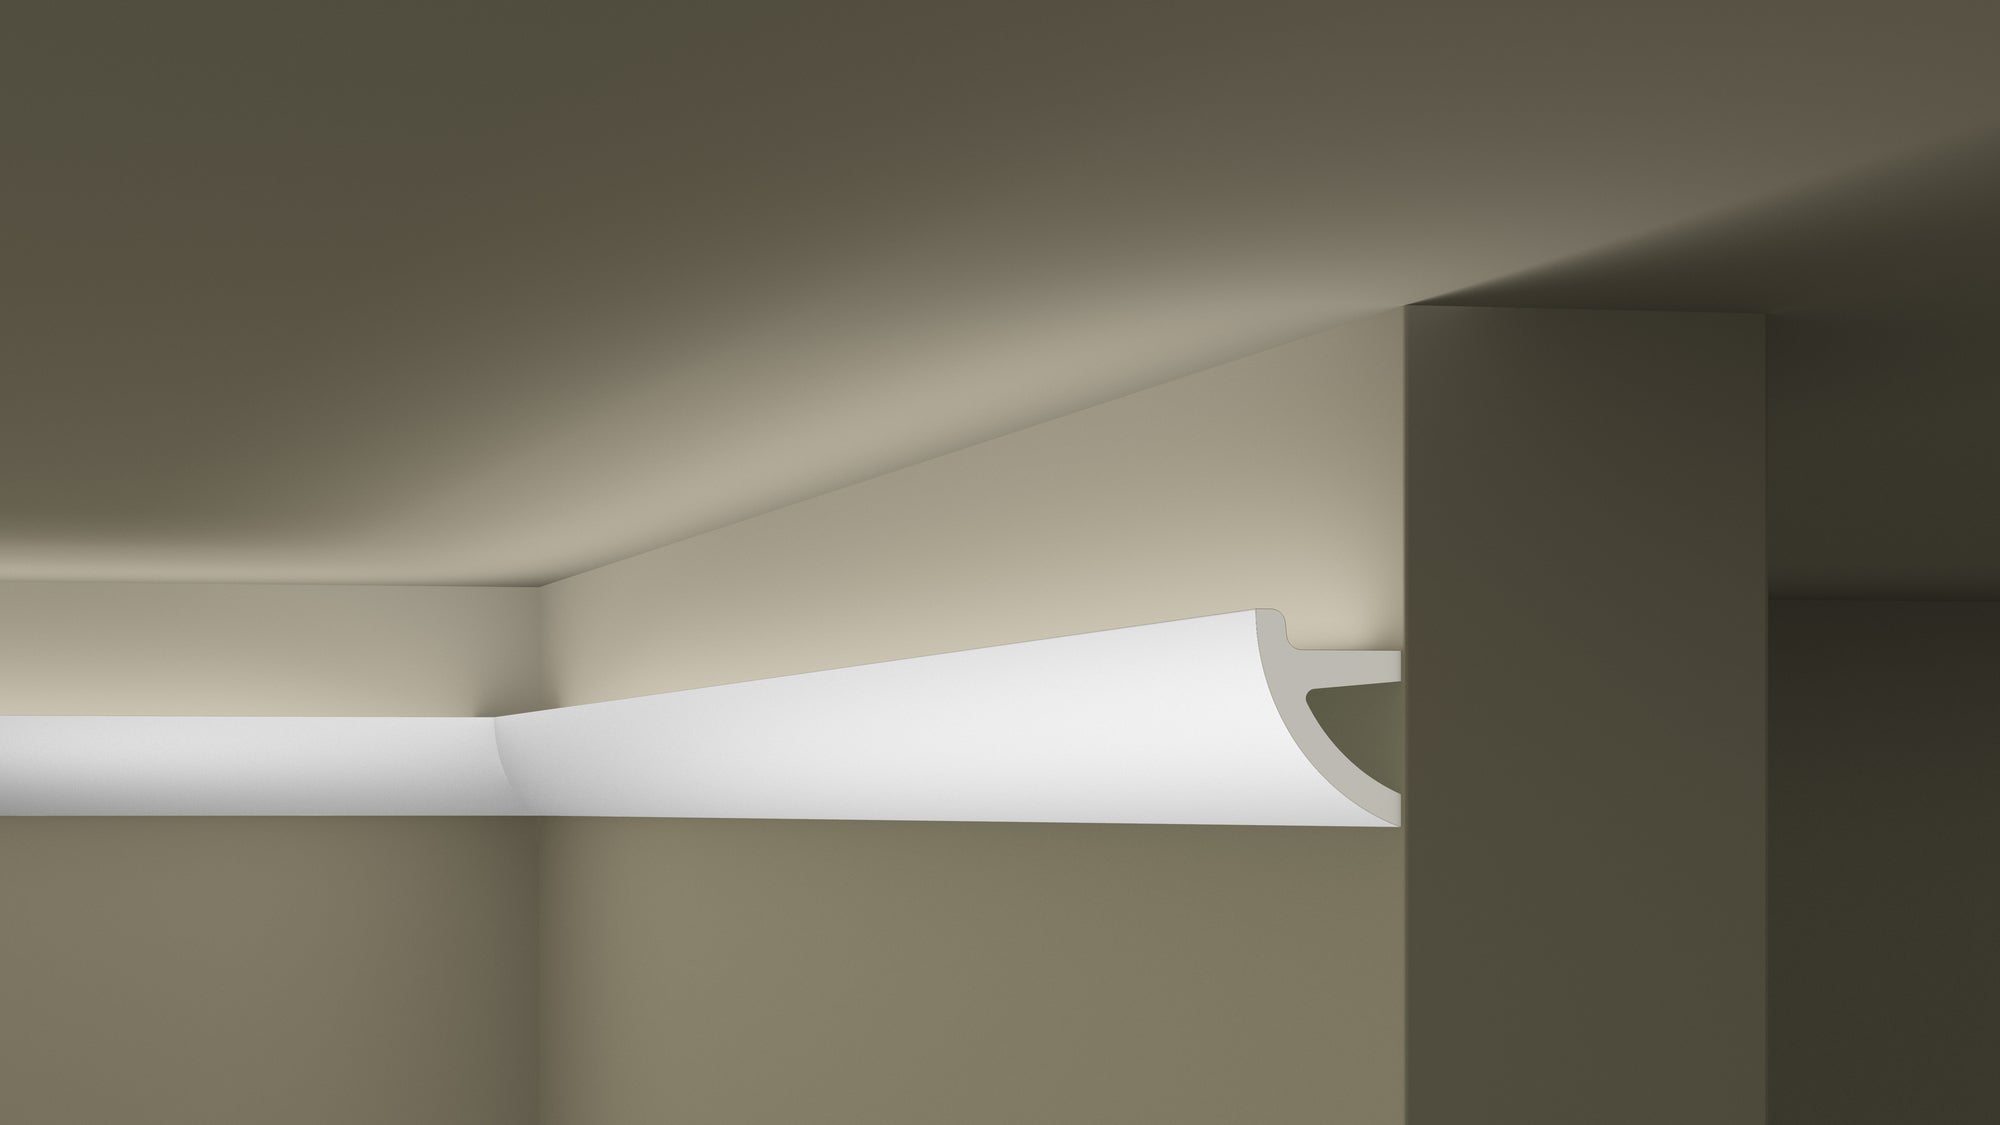 IL1 ARSTYL 2M COVING LIGHTING SOLUTION - Covings | DecorMania